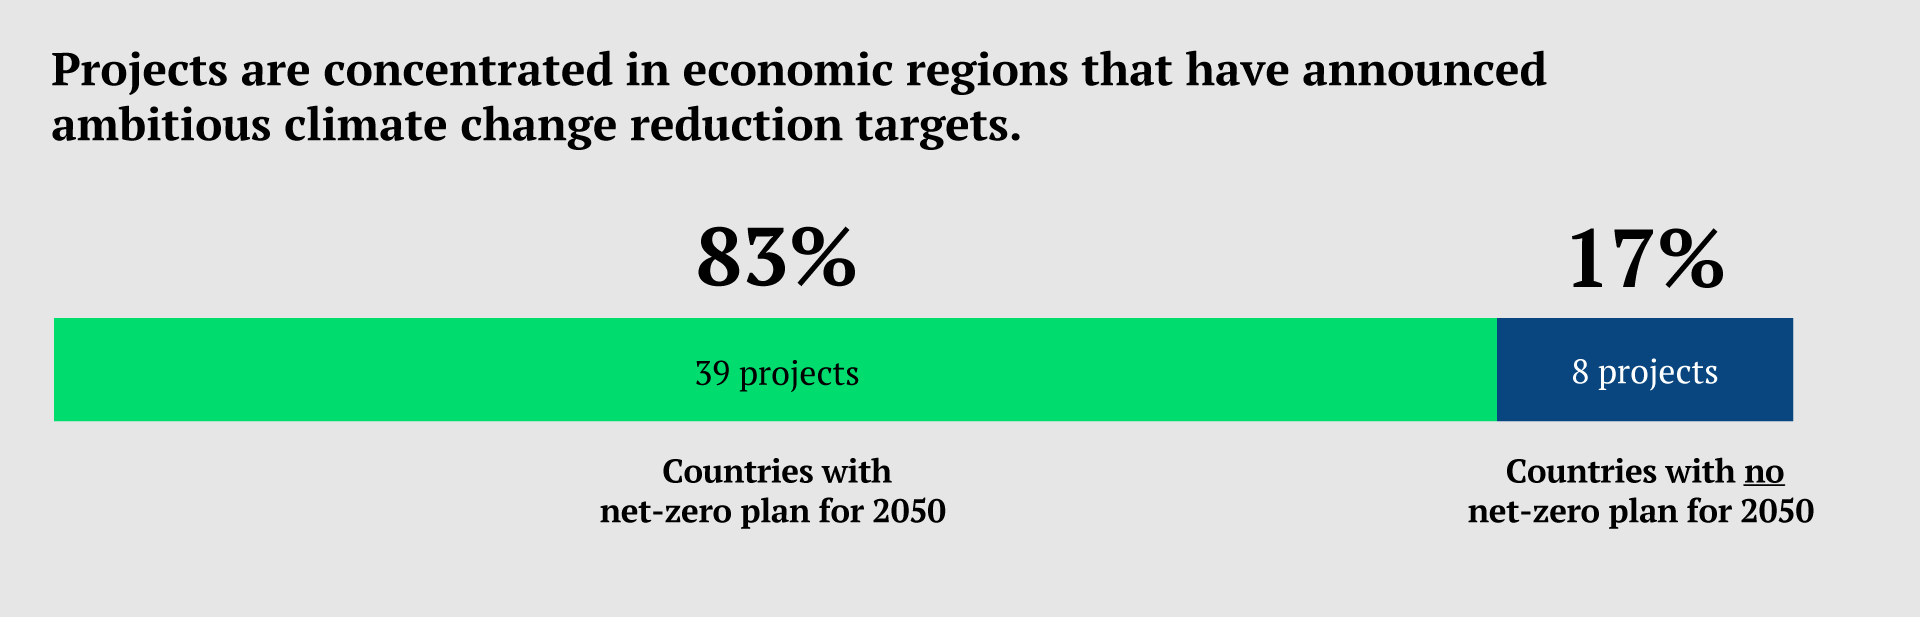 Projects are concentrated in economic regions that have announced ambitious climate change reduction targets